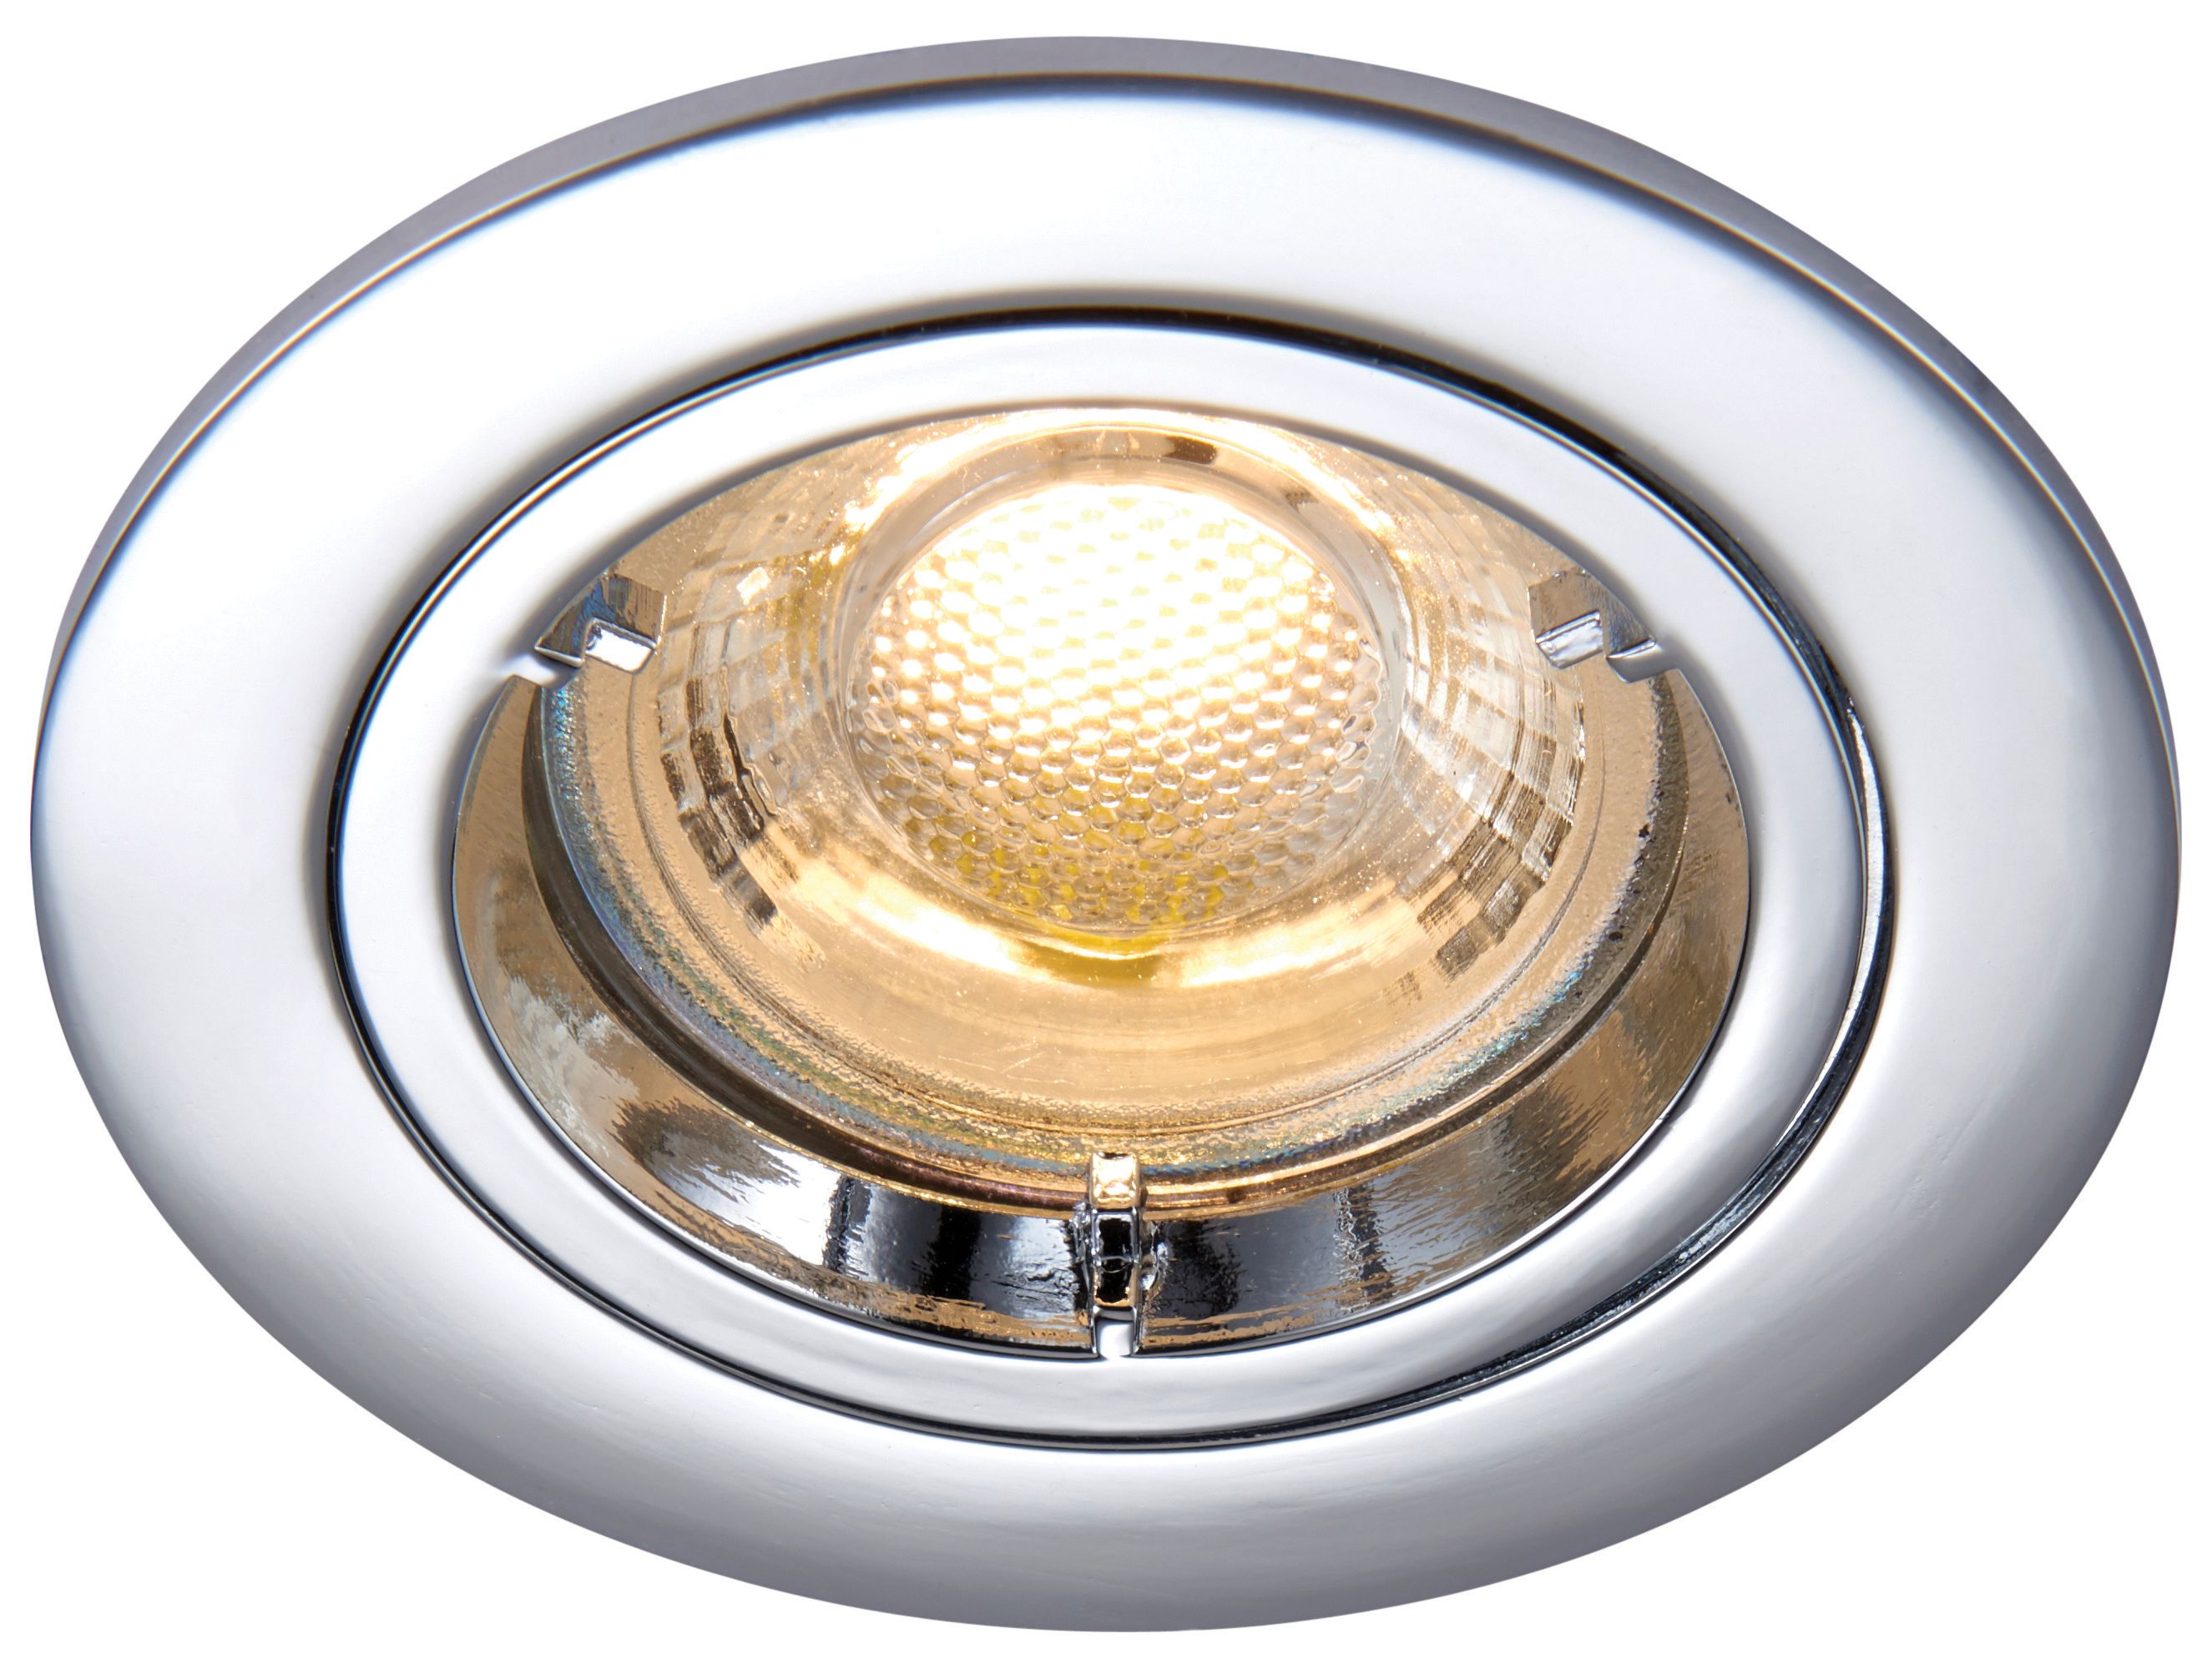 Saxby GU10 Cast Fixed Downlight - Chrome Effect